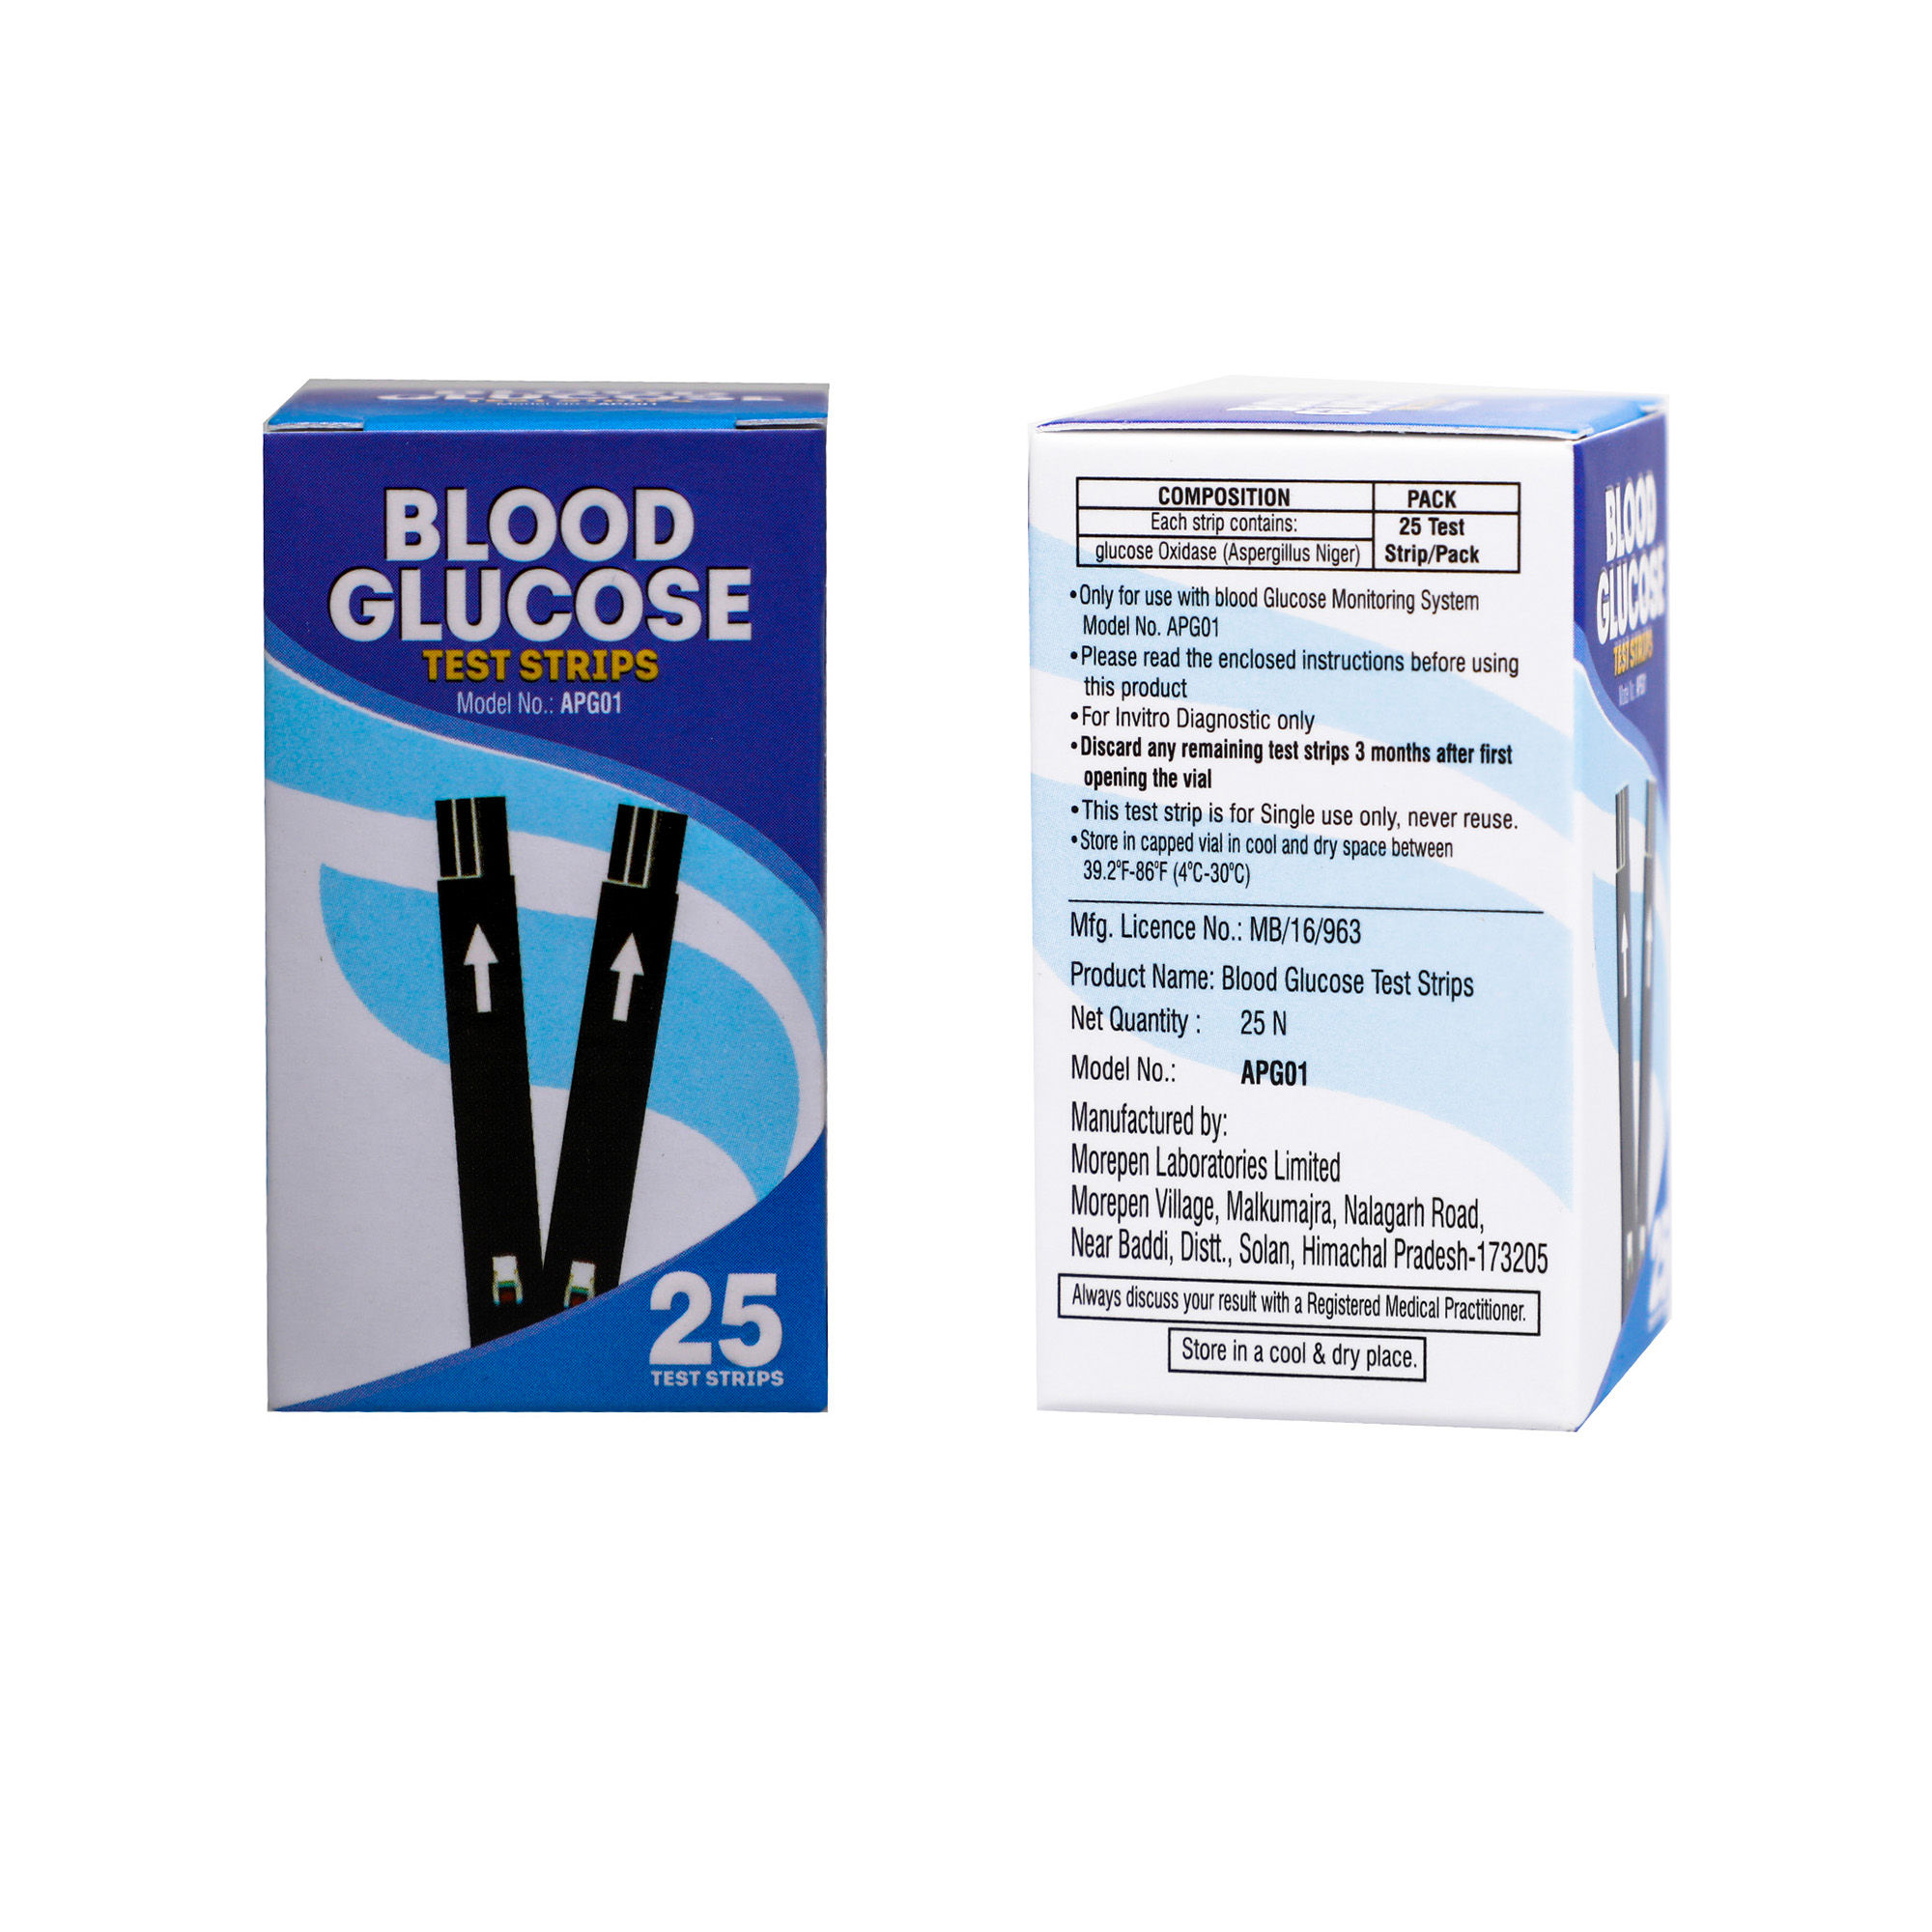 Apollo Pharmacy Blood Glucose 25 Test Strips + 25 Lancets, 1 kit, Pack of 1 